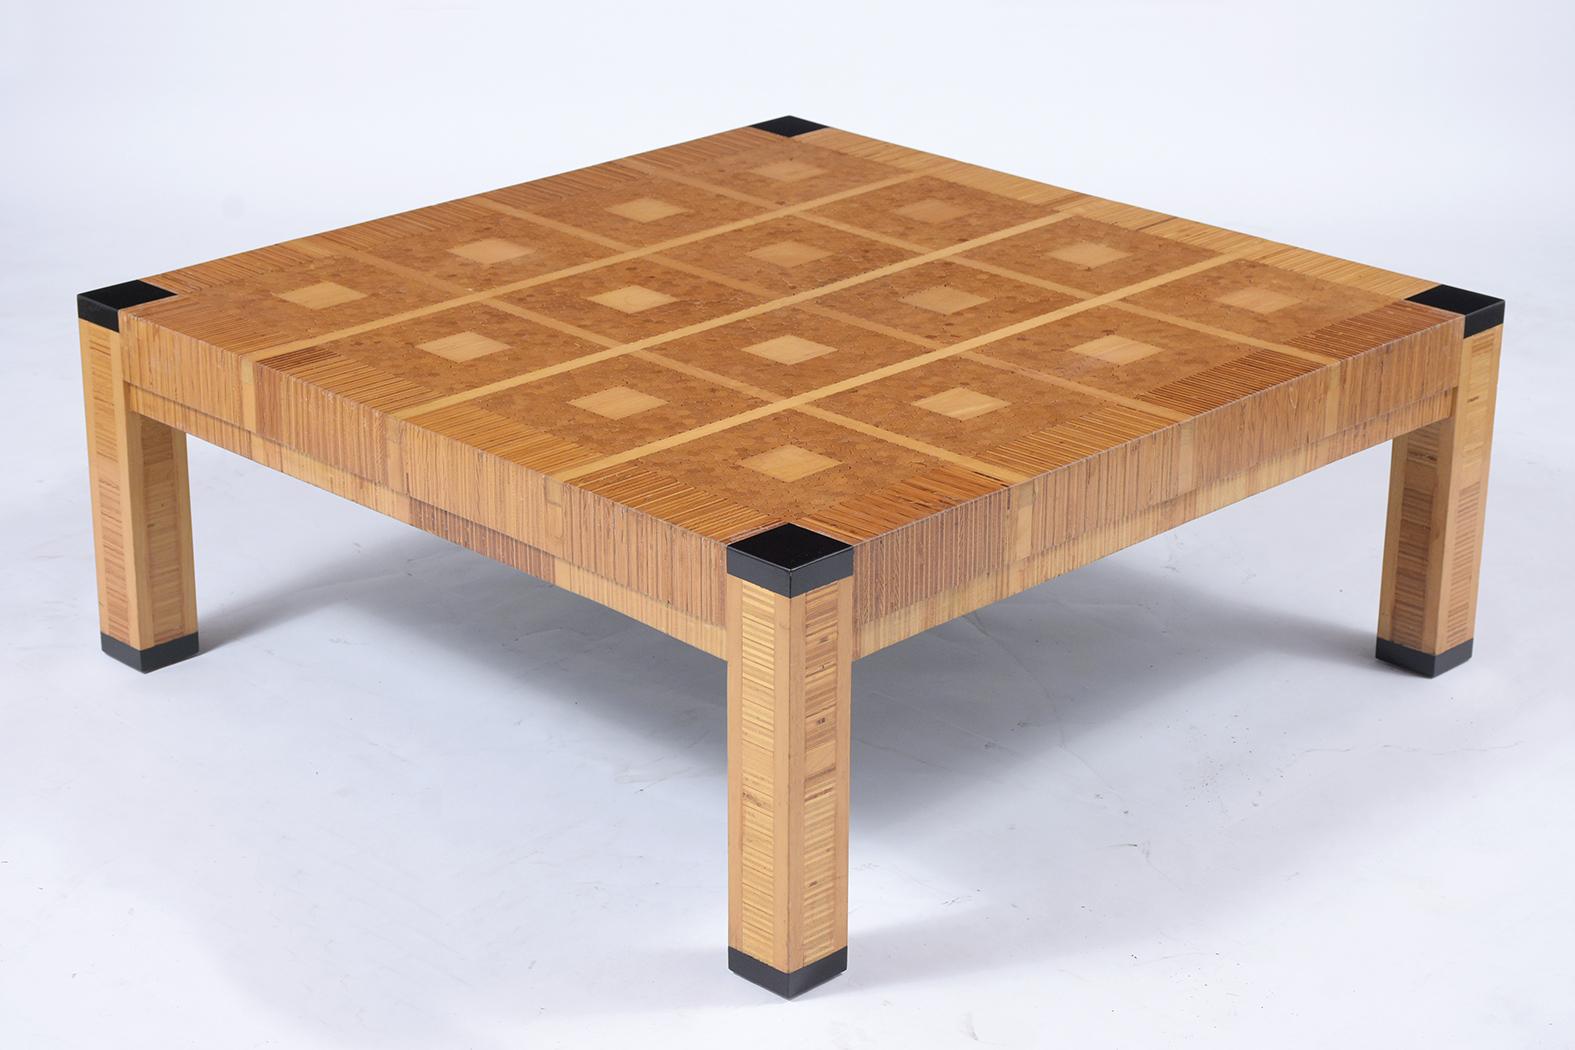 This mid-century modern maple coffee table is made from maple wood that is inlaid in a geometric pattern and has been fully restored by our team of expert craftsmen. The table features a natural finish and ebonized details, and the square pattern is